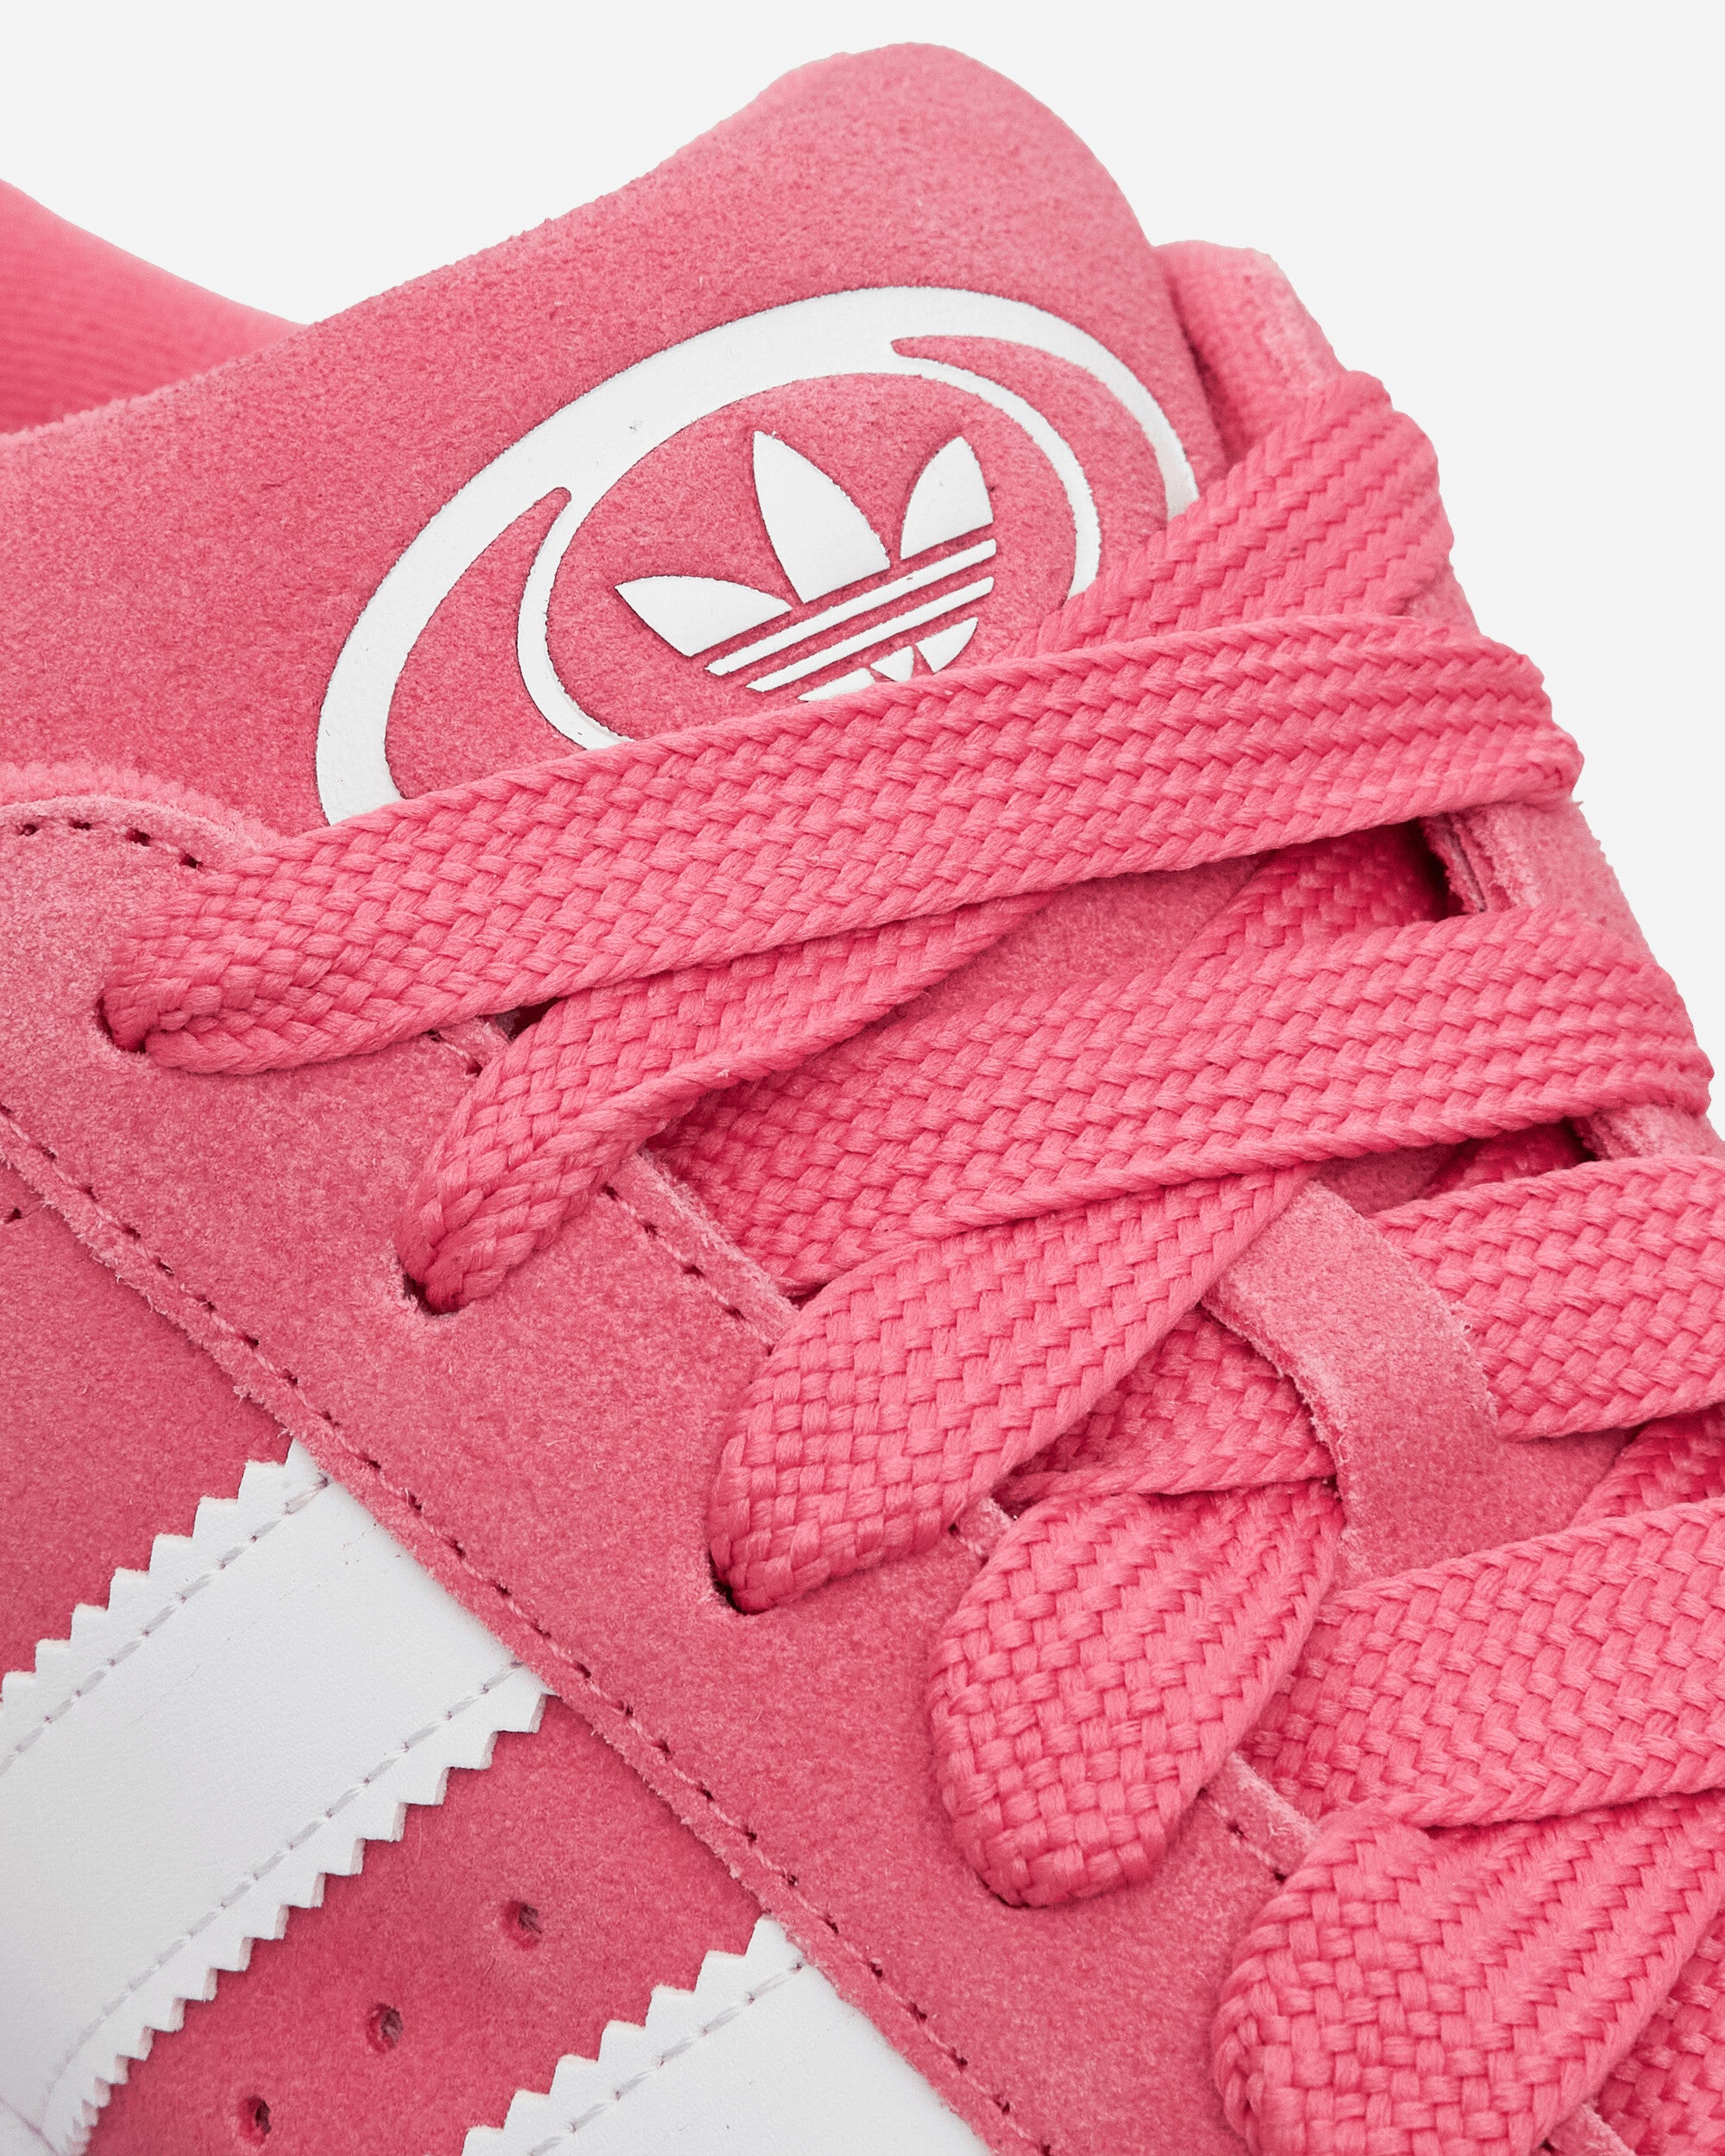 adidas Wmns Campus 00s Pinkfus/Ftwwht Sneakers Low ID7028 001